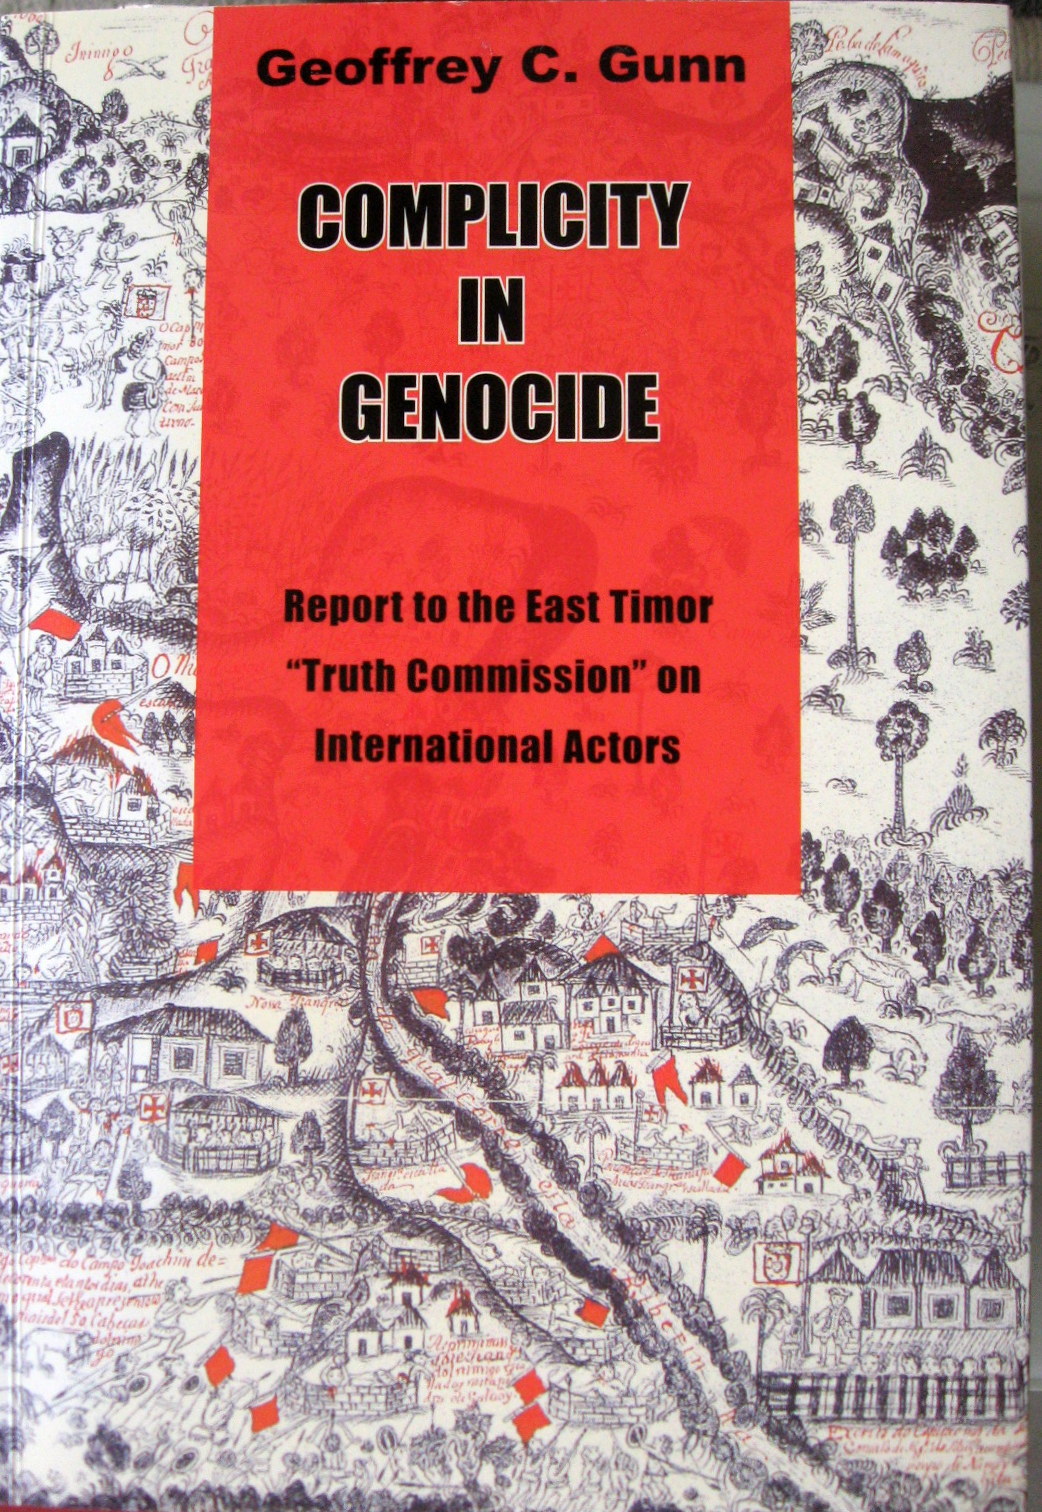 Complicity in Genocide; Report to the East Timor Truth Commission on International Actors